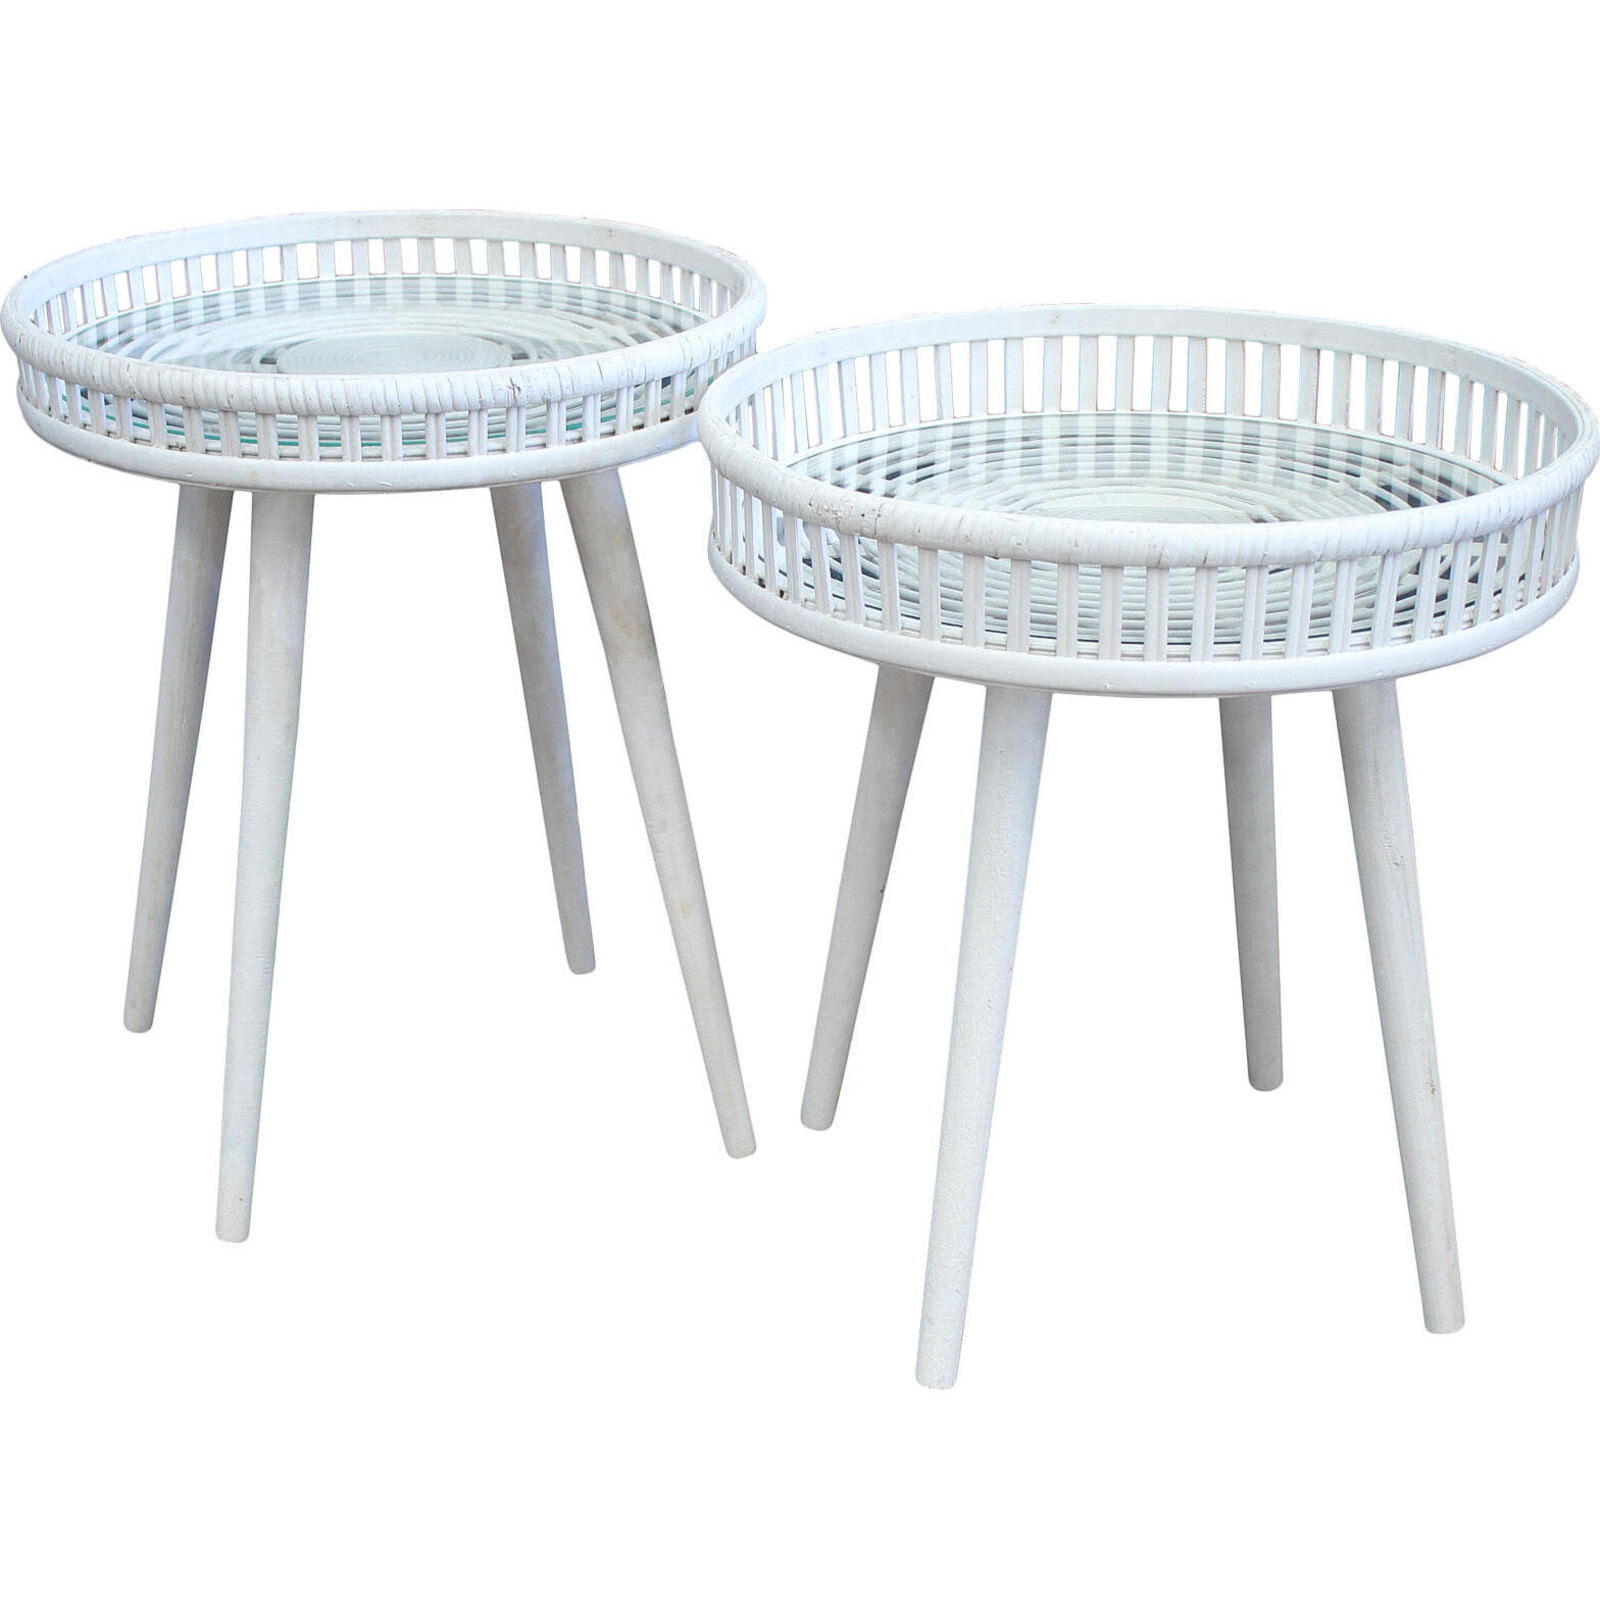 Nest Tables S/2 Wash